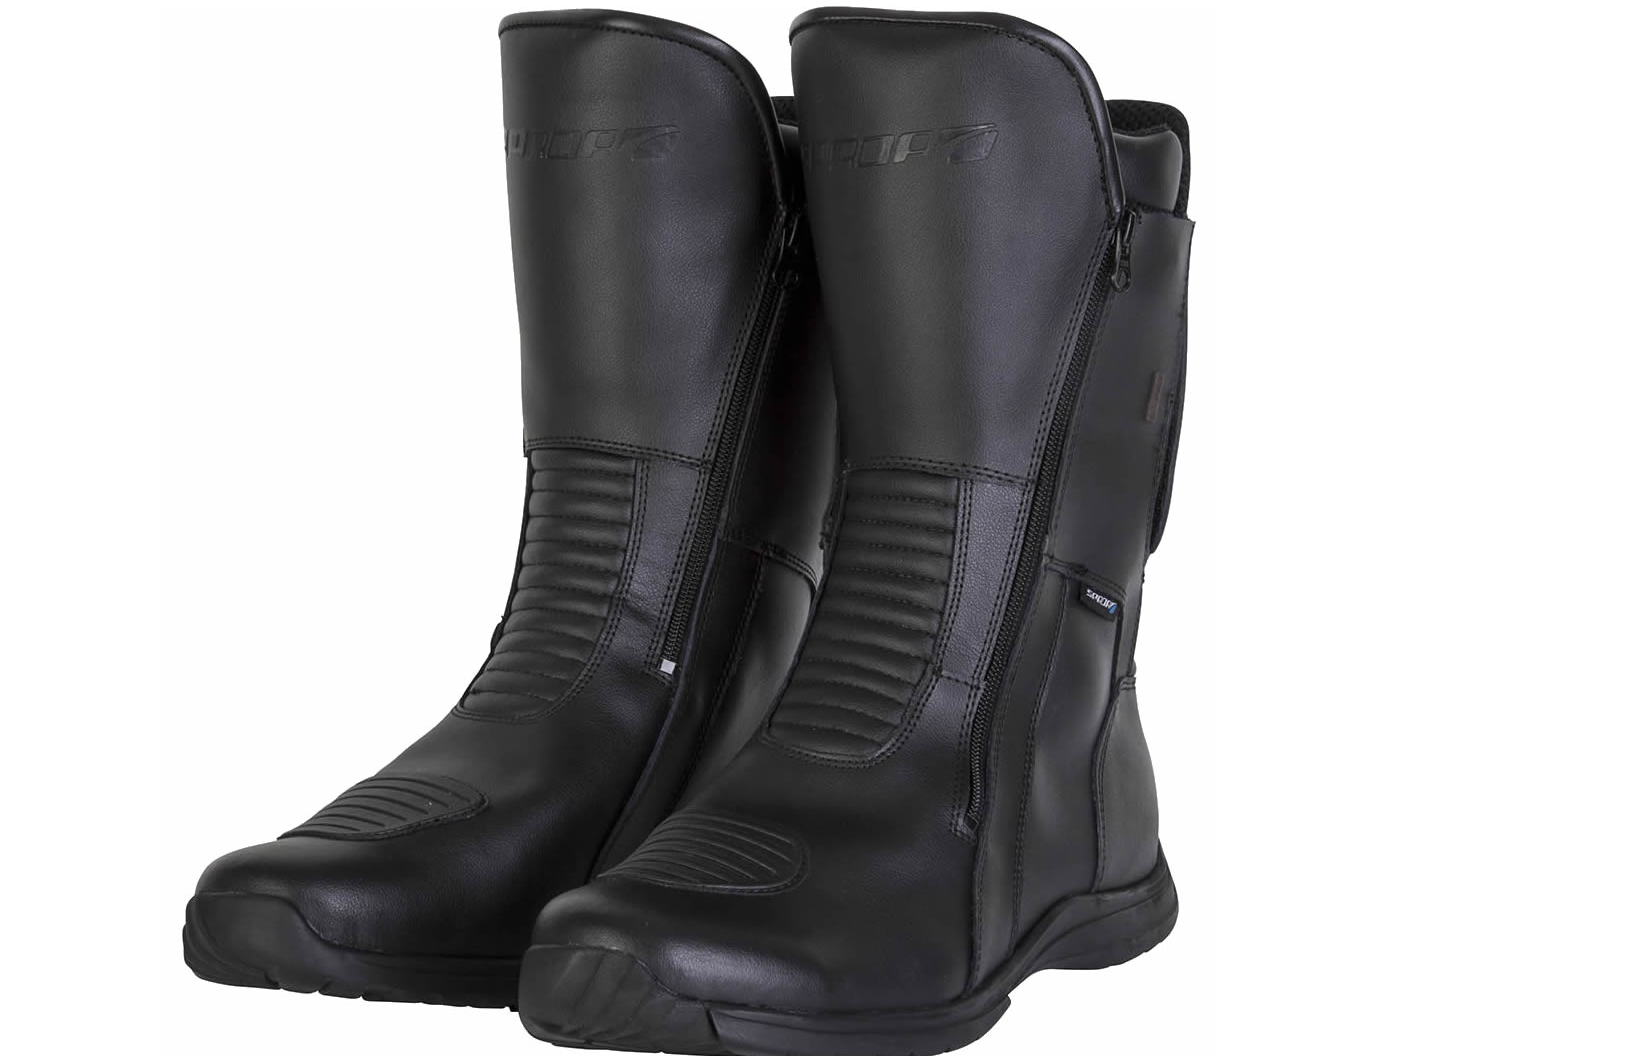 Black Travel WP Touring Motorcycle Boots